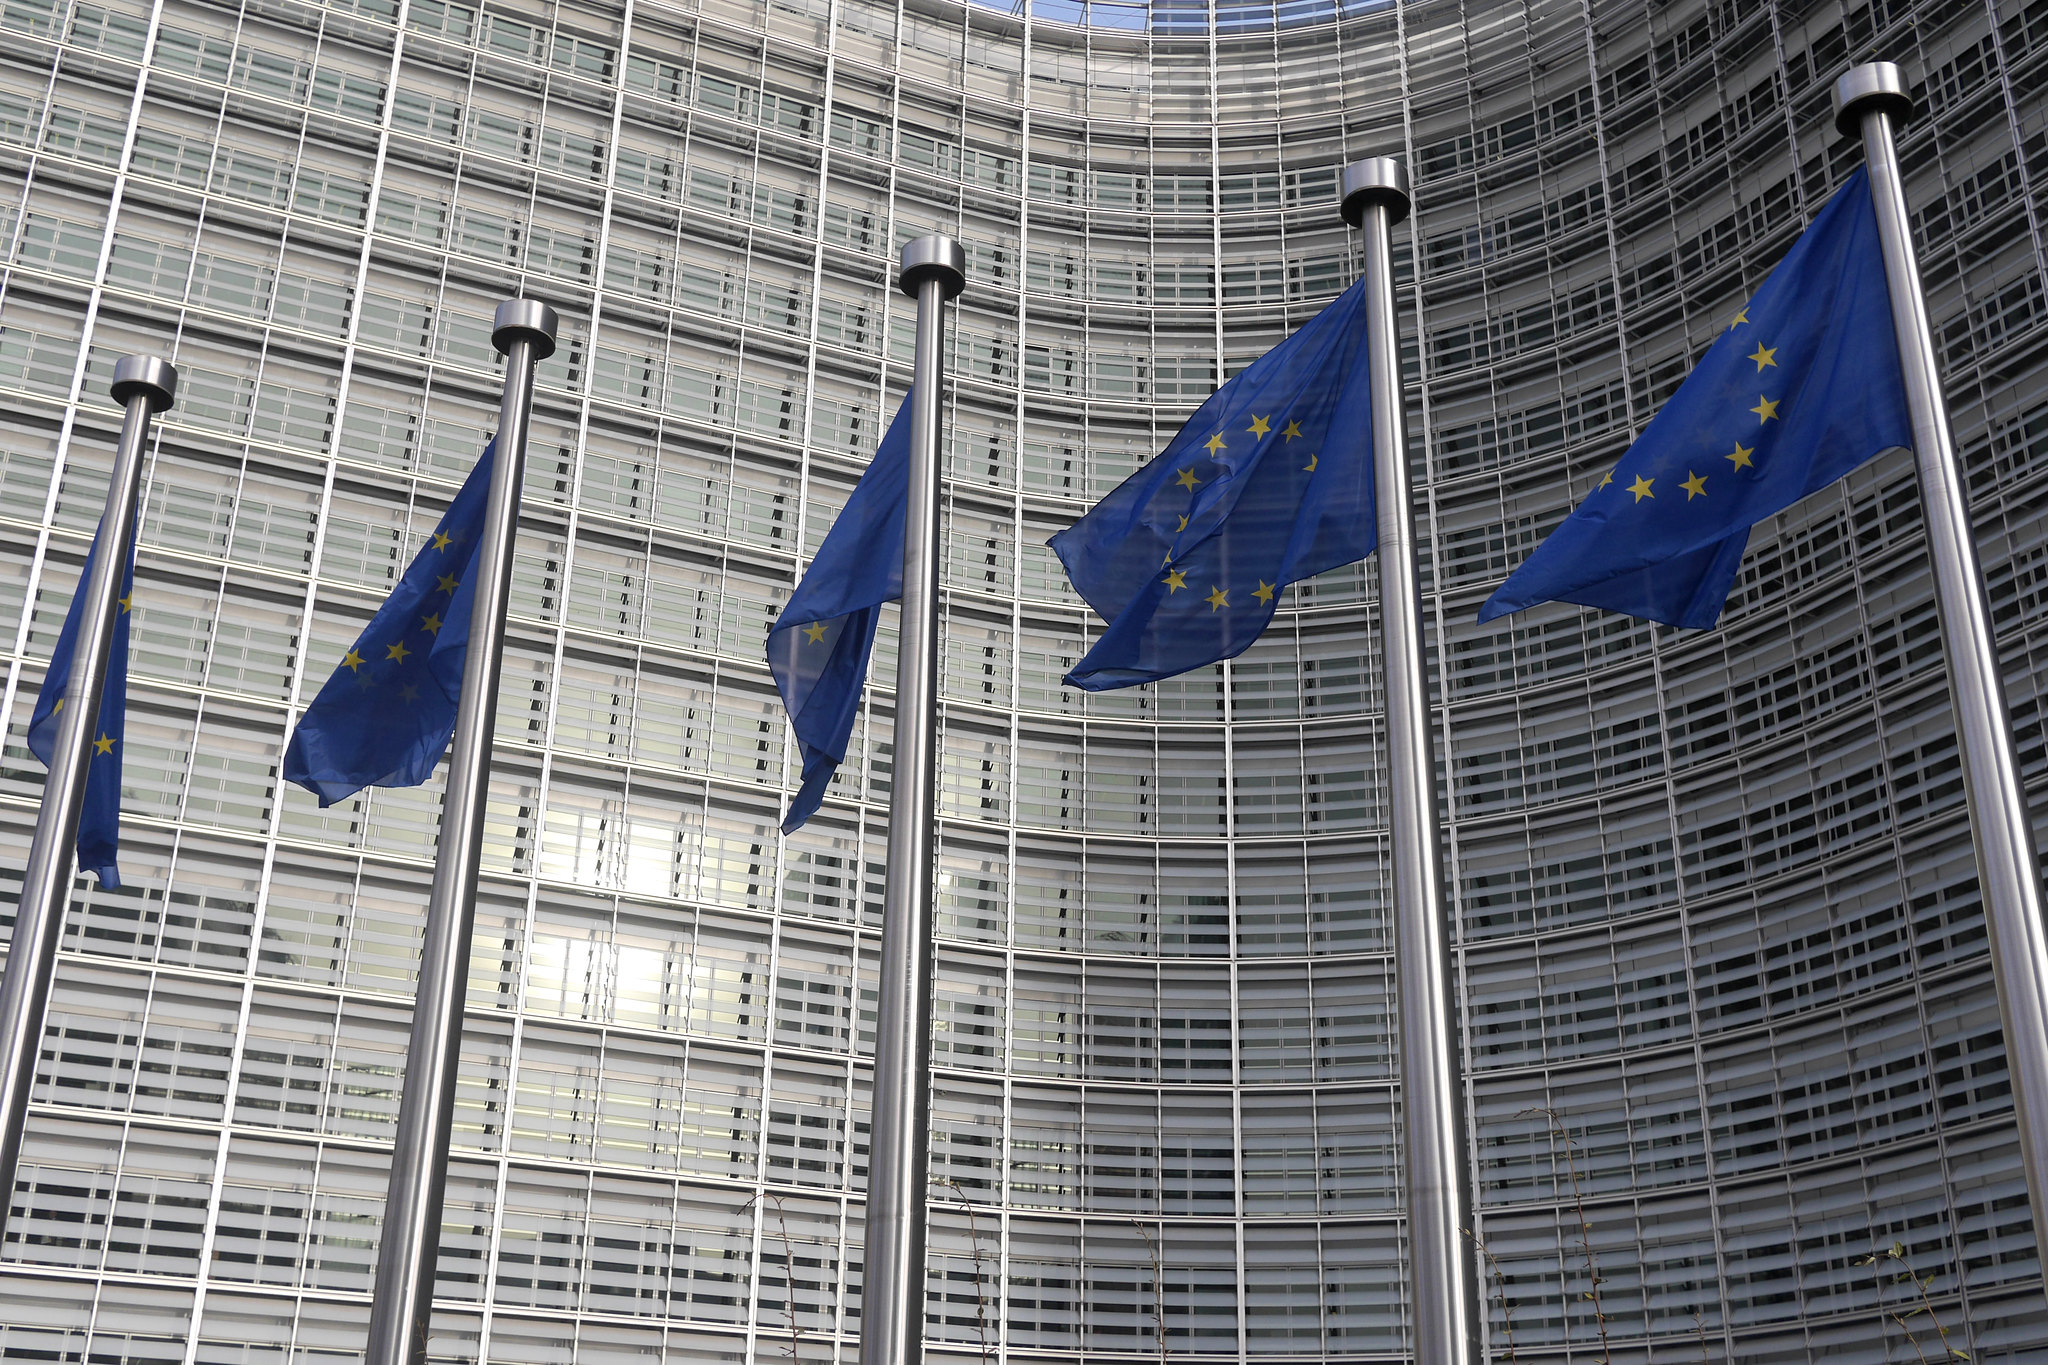 European Commission flags. Image courtesy of LIBER Europe (Flickr).